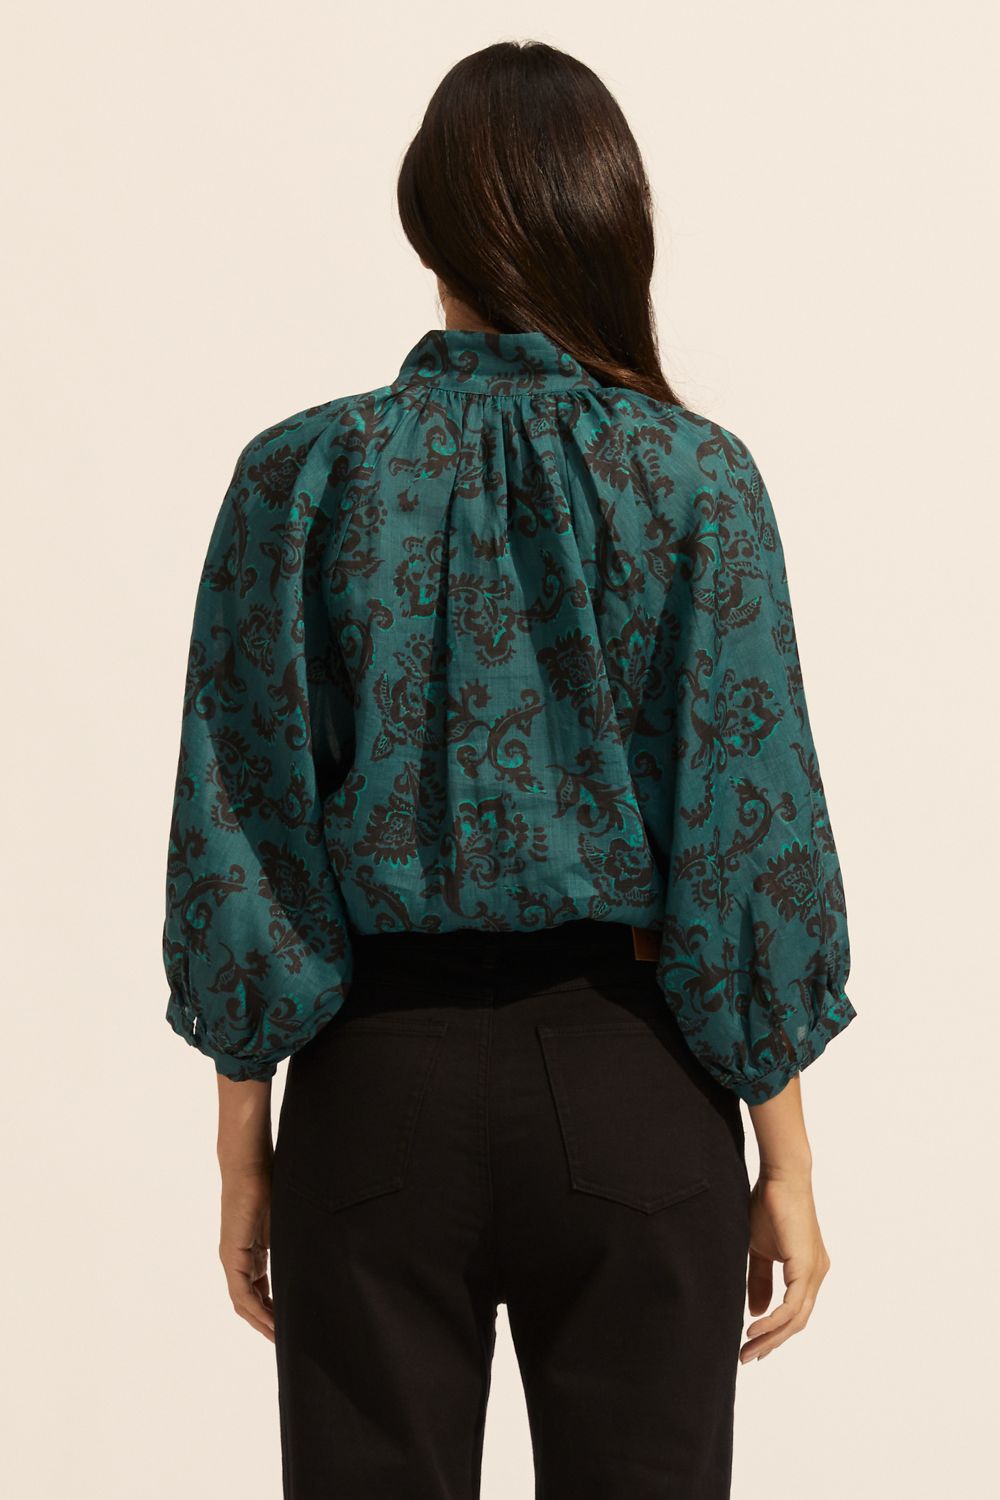 fuse top - green floral